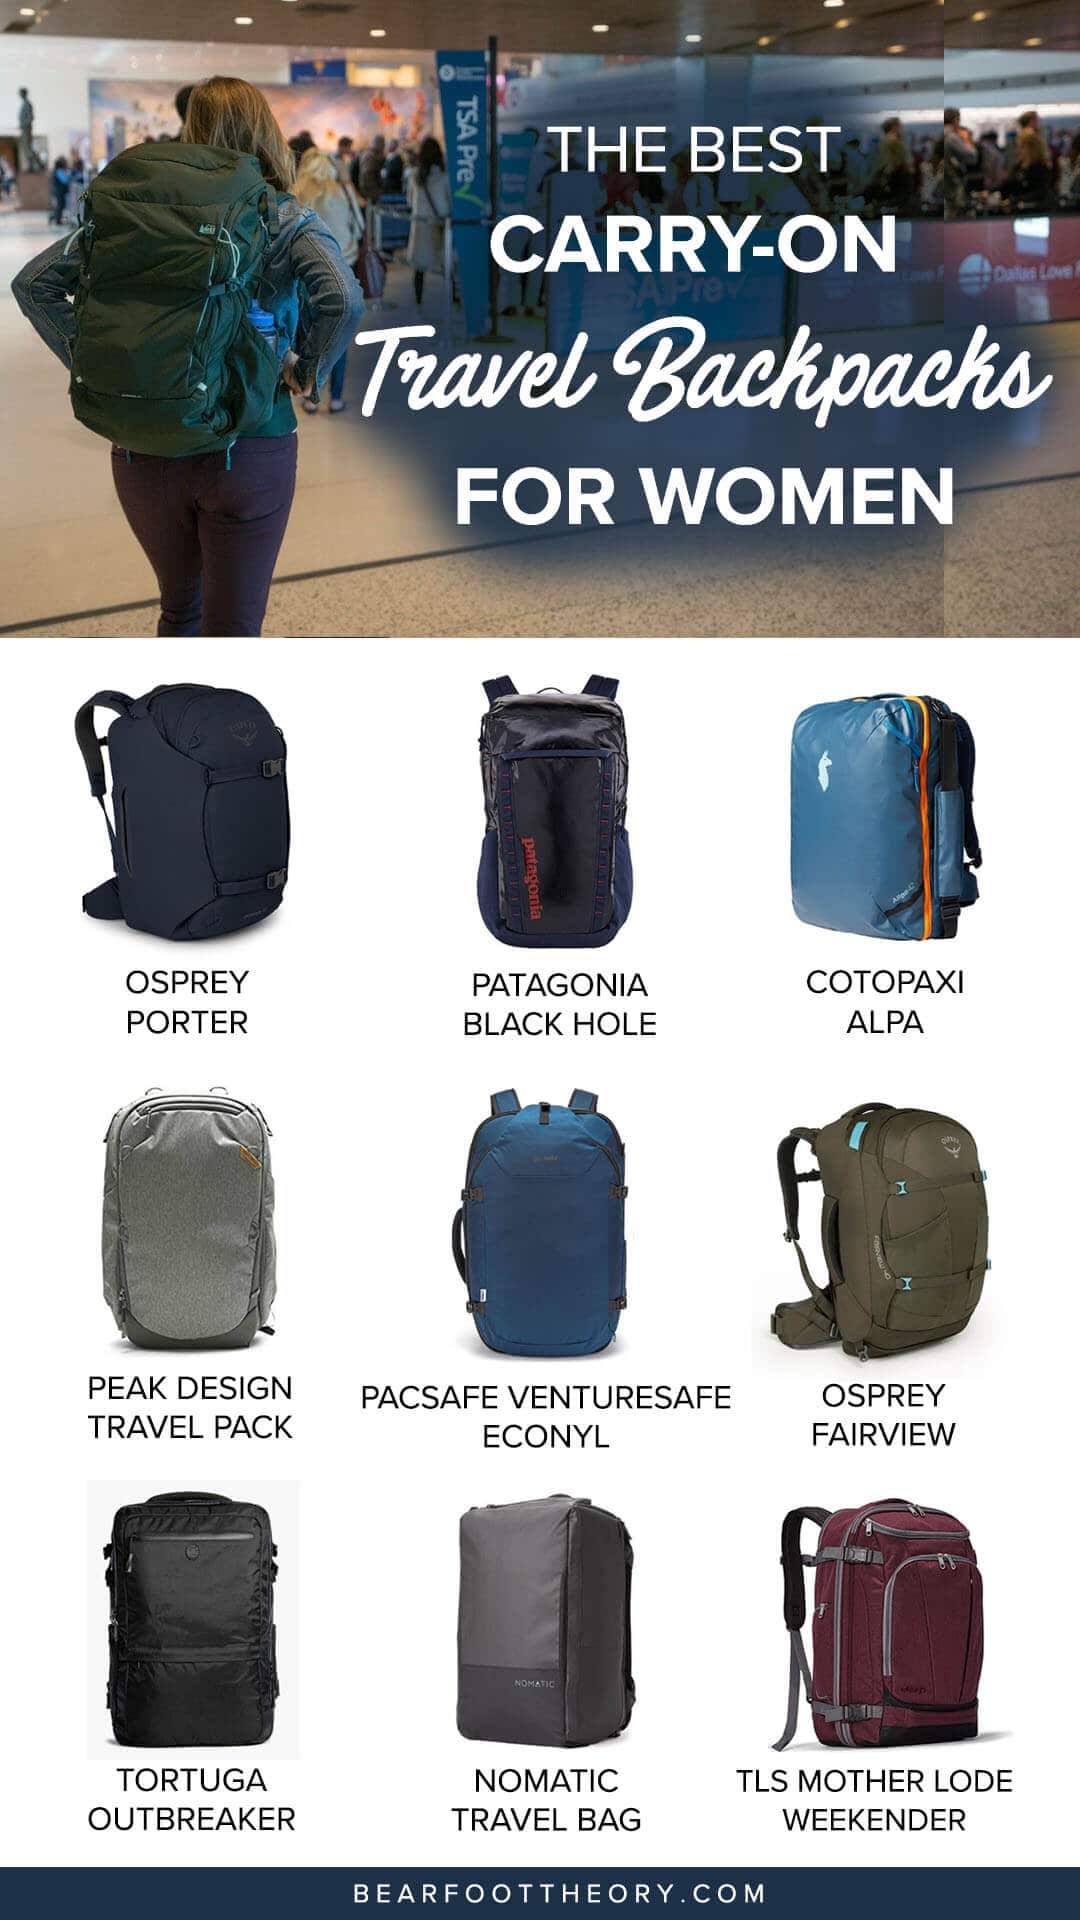 Here are the best carry-on travel backpacks for women so you can pack light, get organized, and be more flexible on your travels.